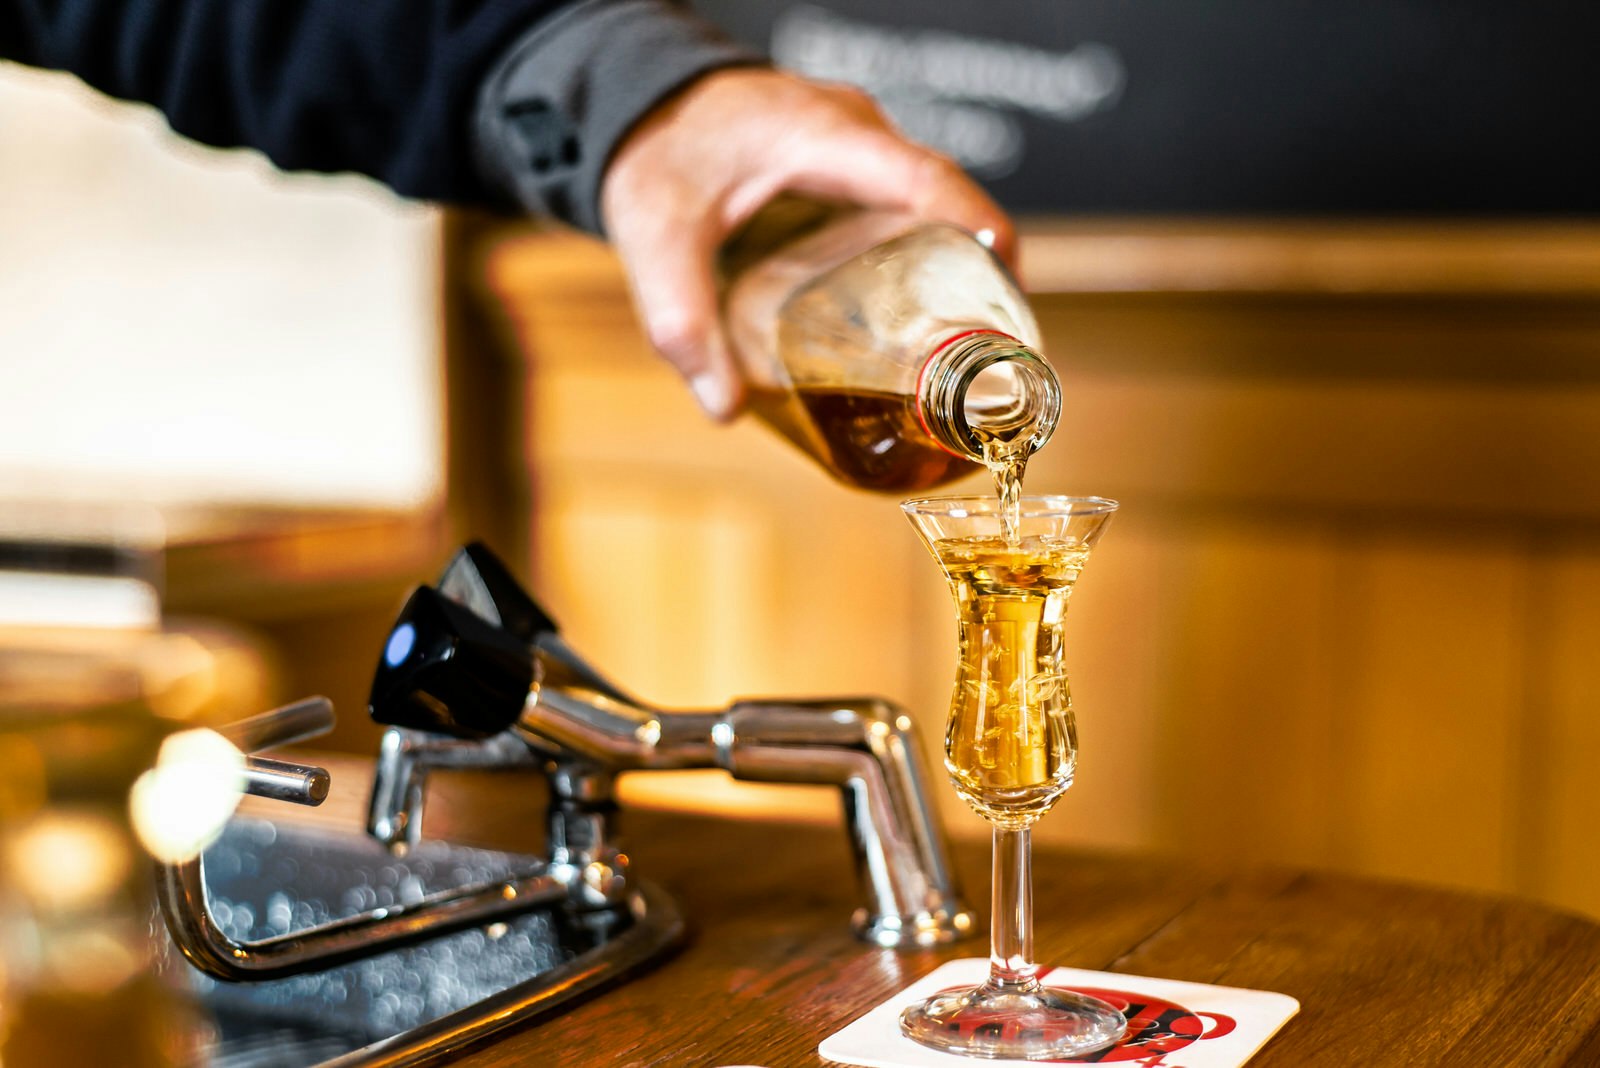 A bartender in Amsterdam pours jenever/genever into a tulip shot glass, as part of a tradition called kopstootje.